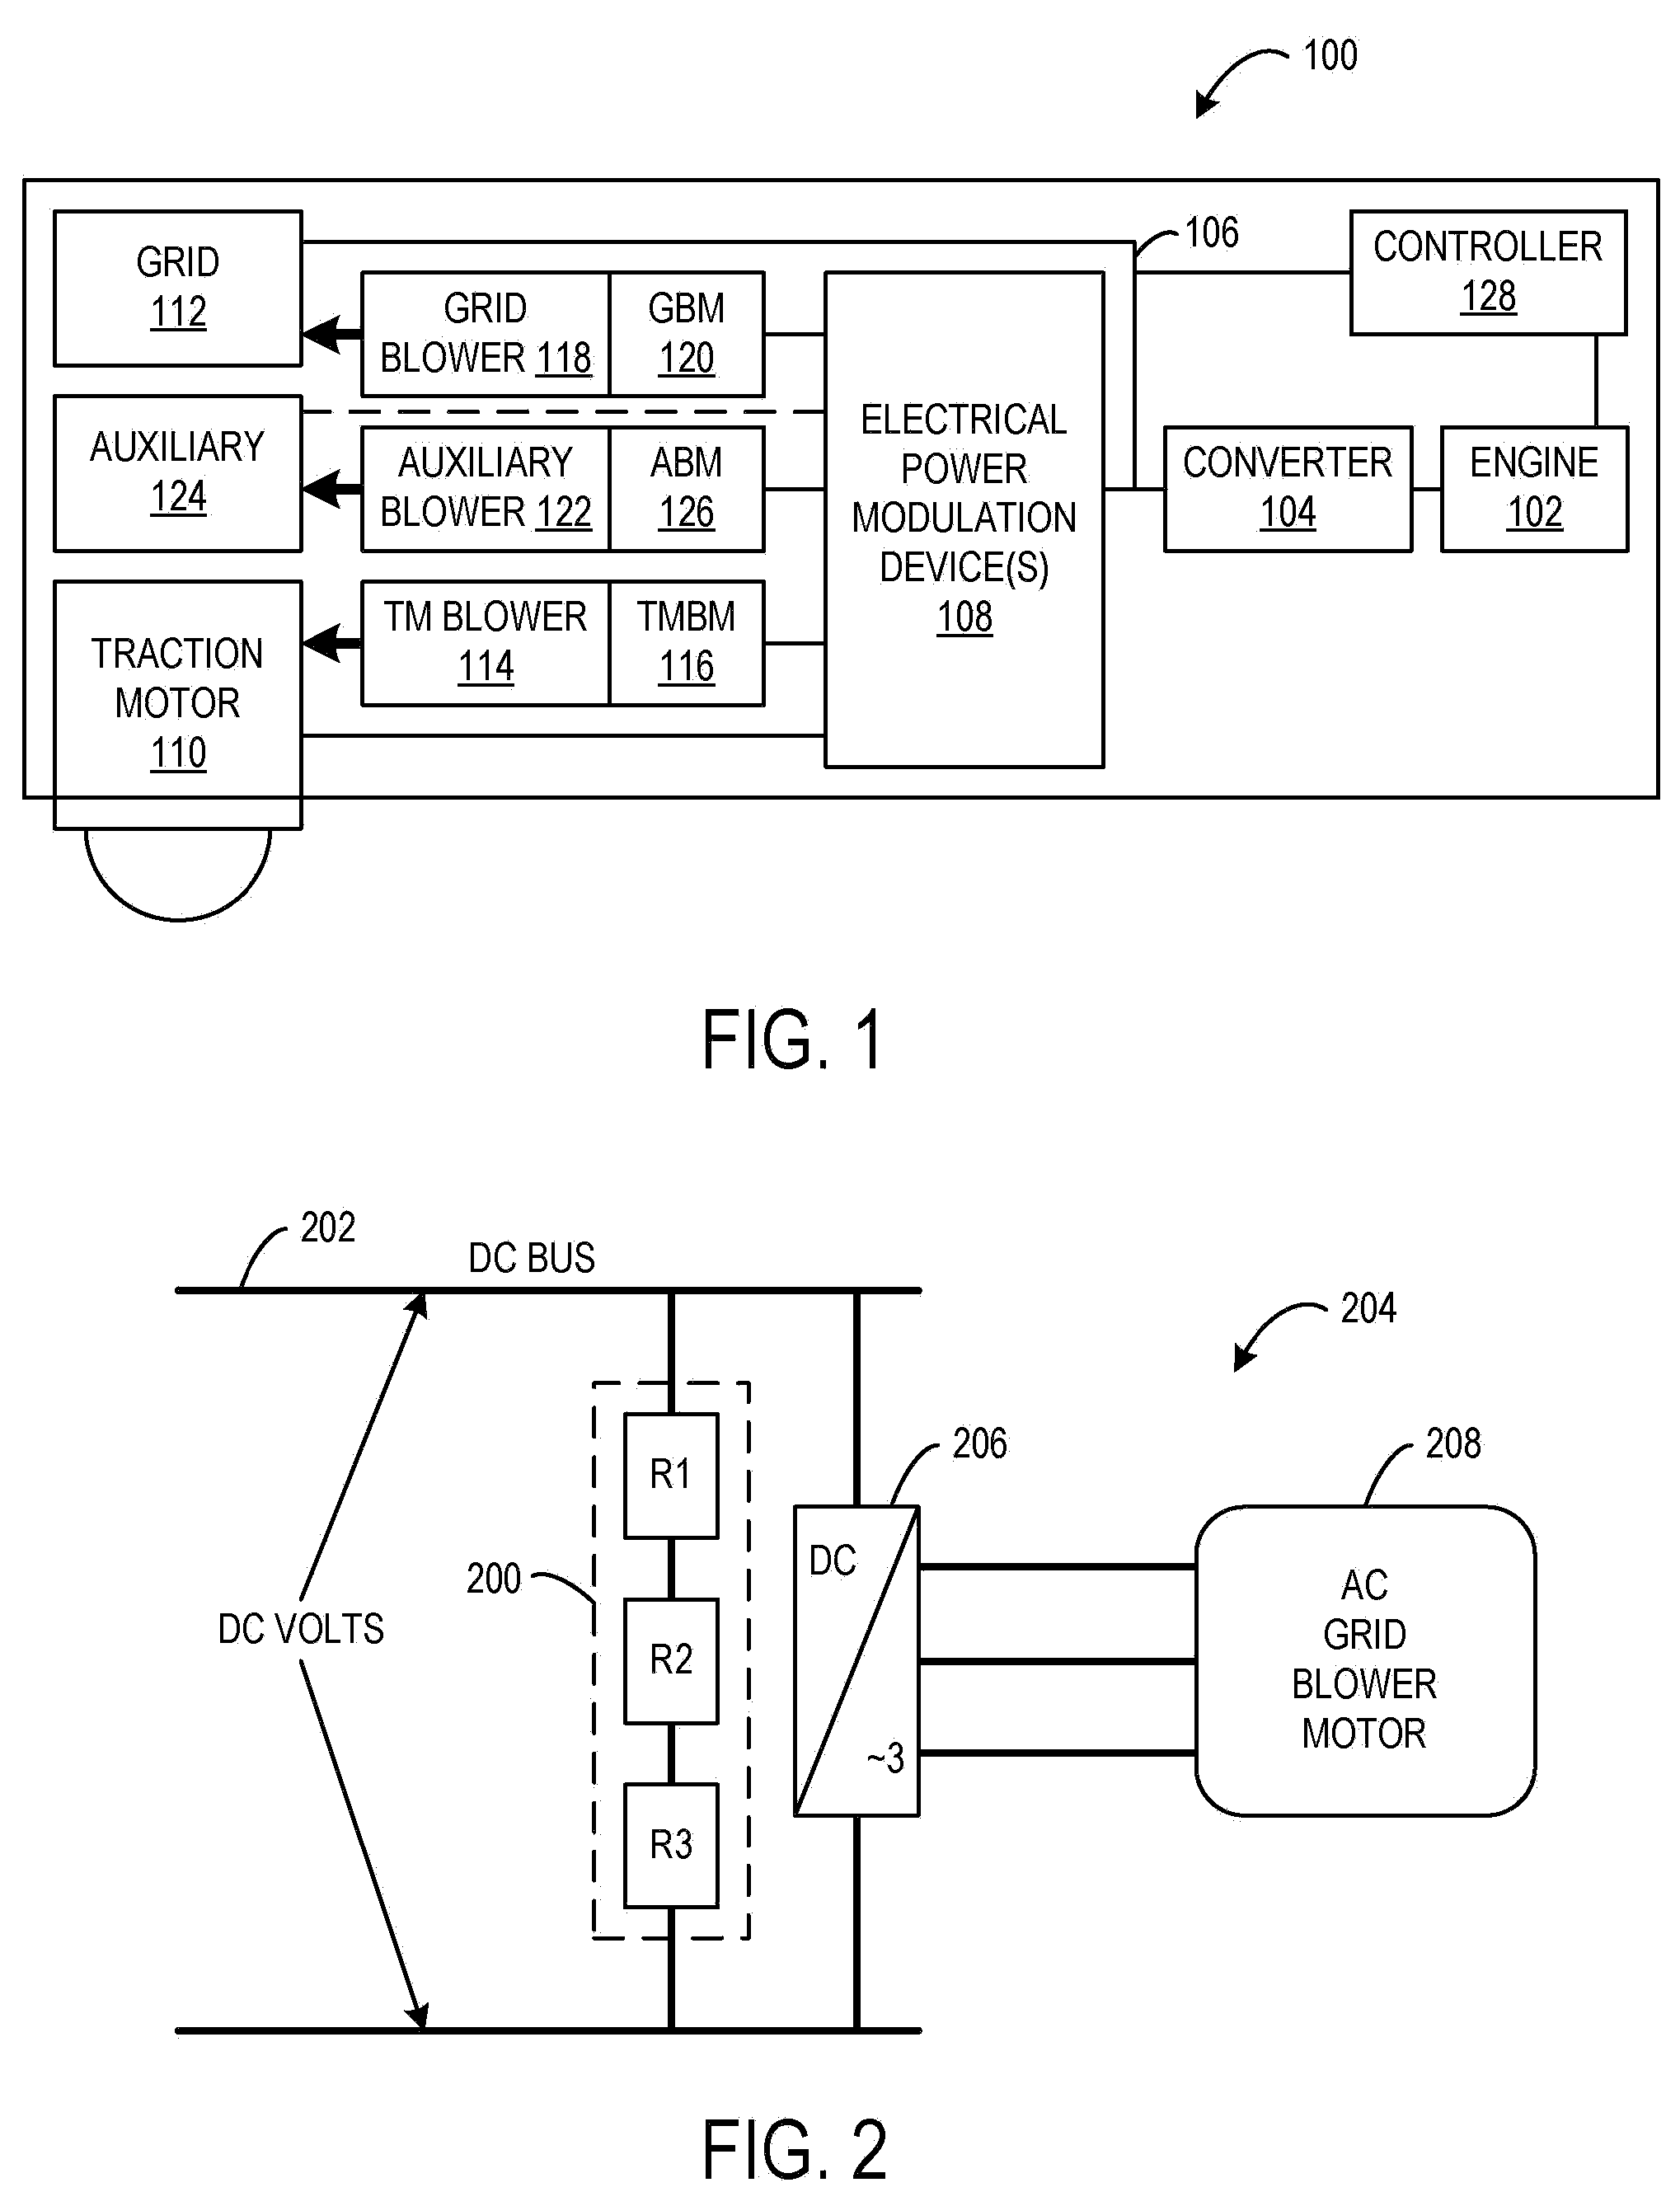 Variable-Speed-Drive System for a Grid Blower